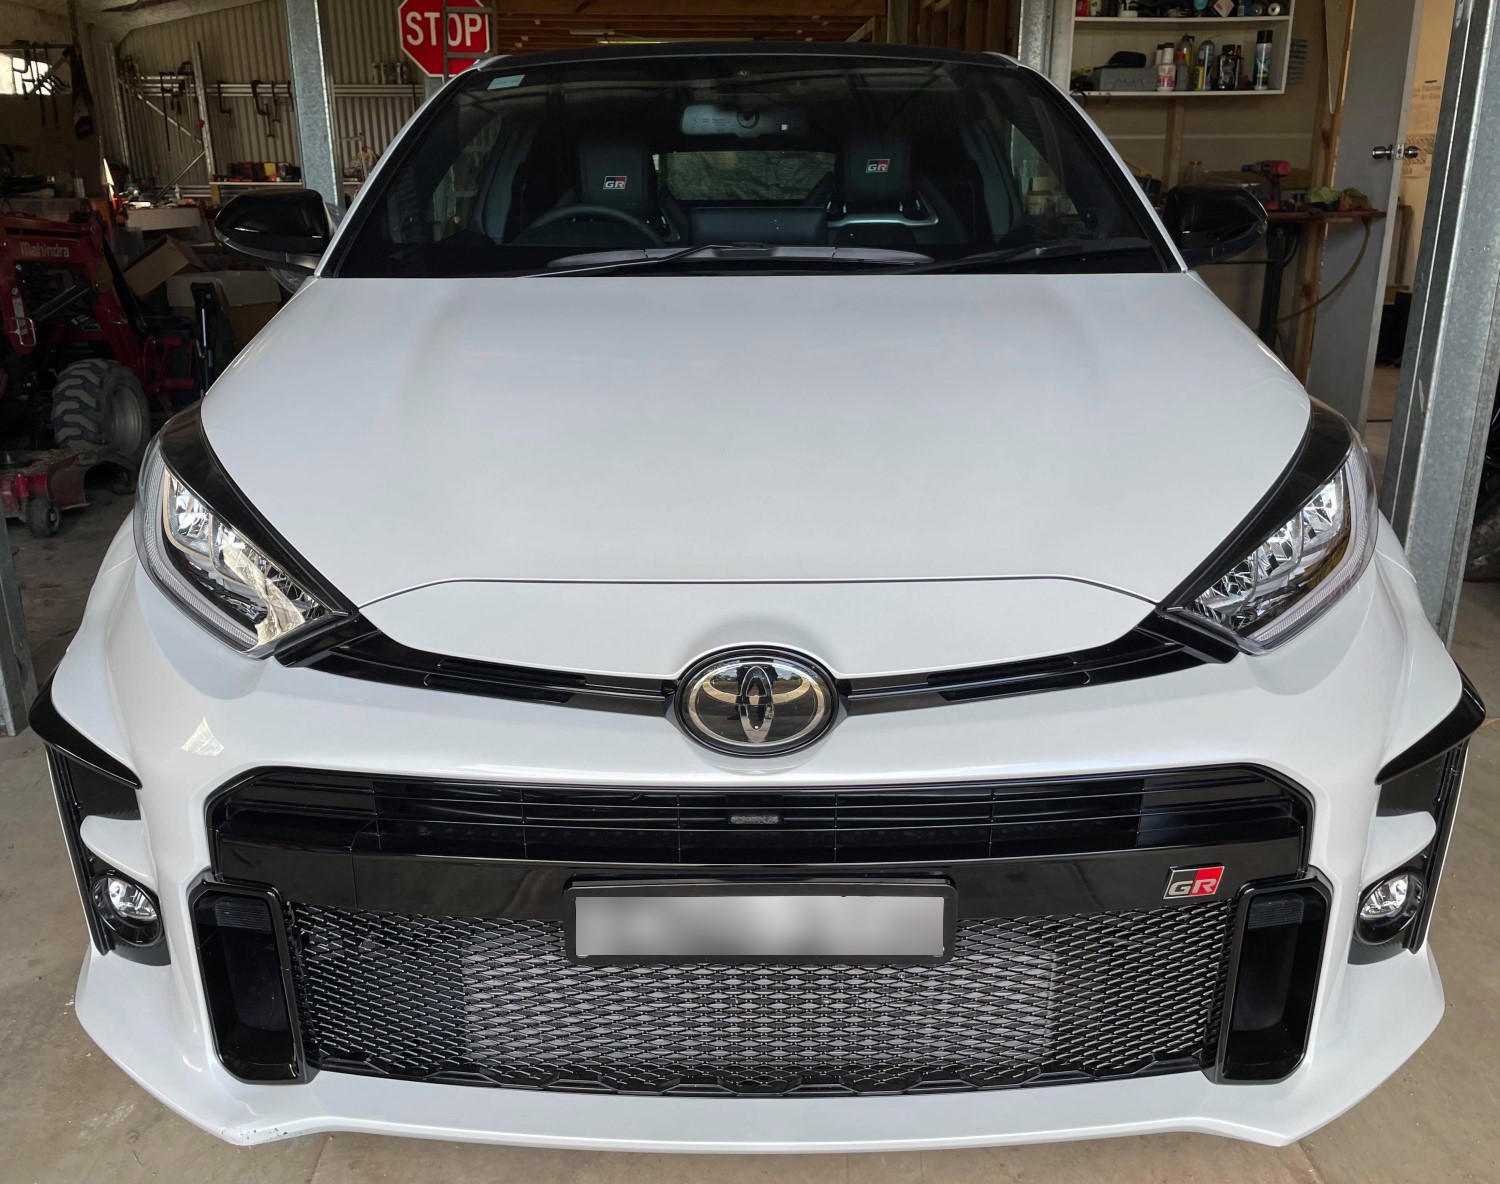 Diamonds Are a Car's Best Friend: The Toyota Yaris GR's New Grille Mesh